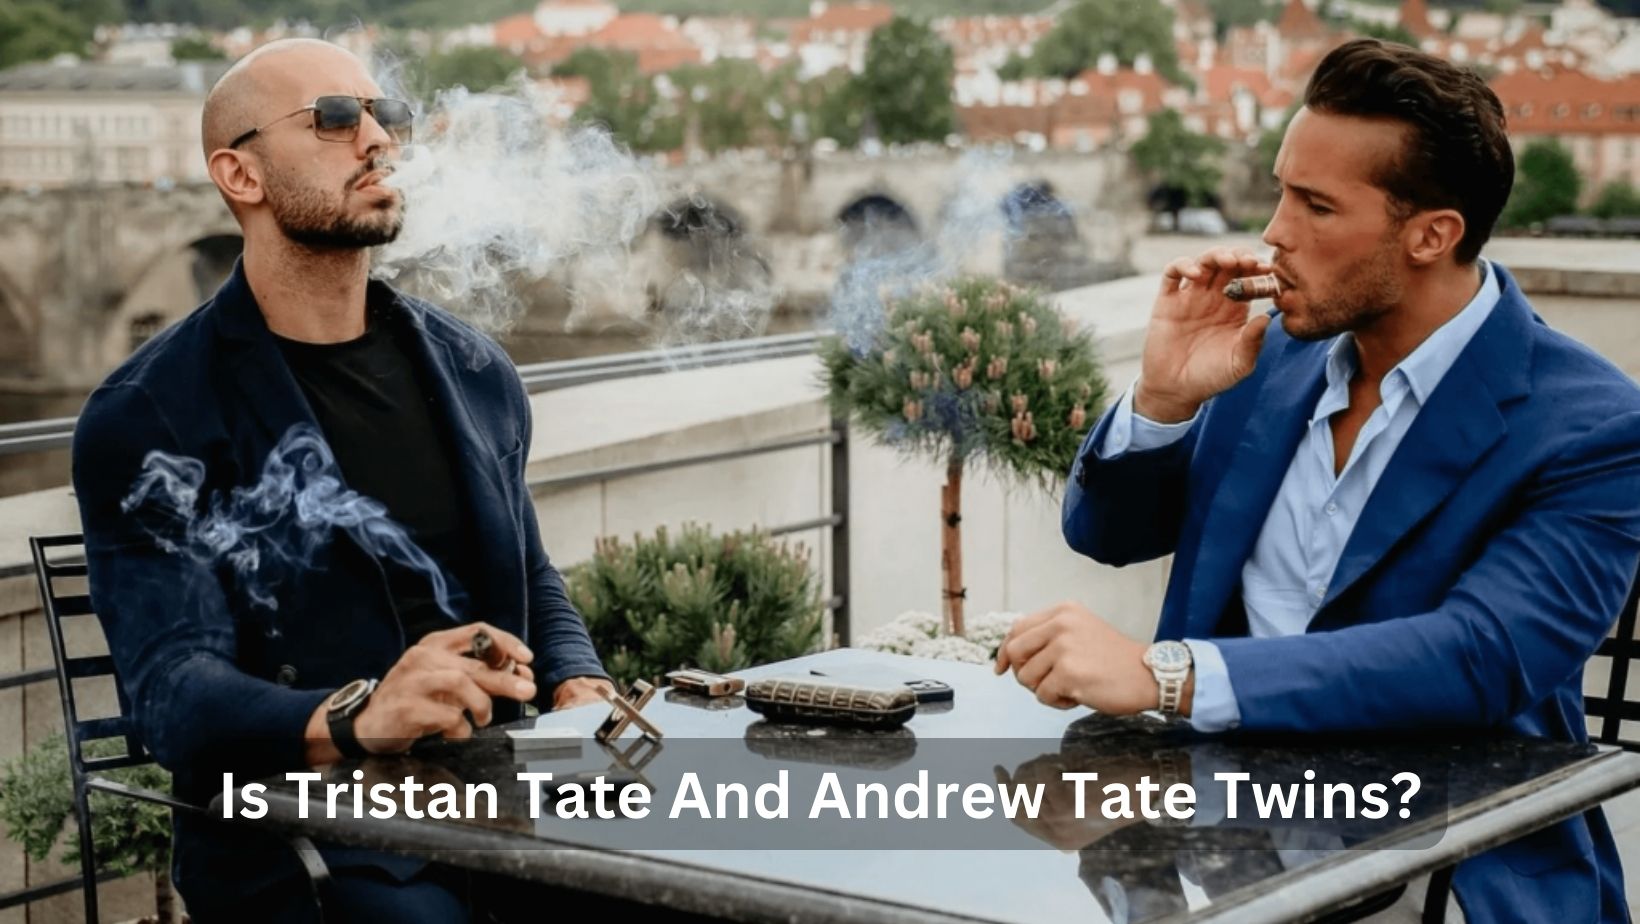 Is Tristan Tate And Andrew Tate Twins?